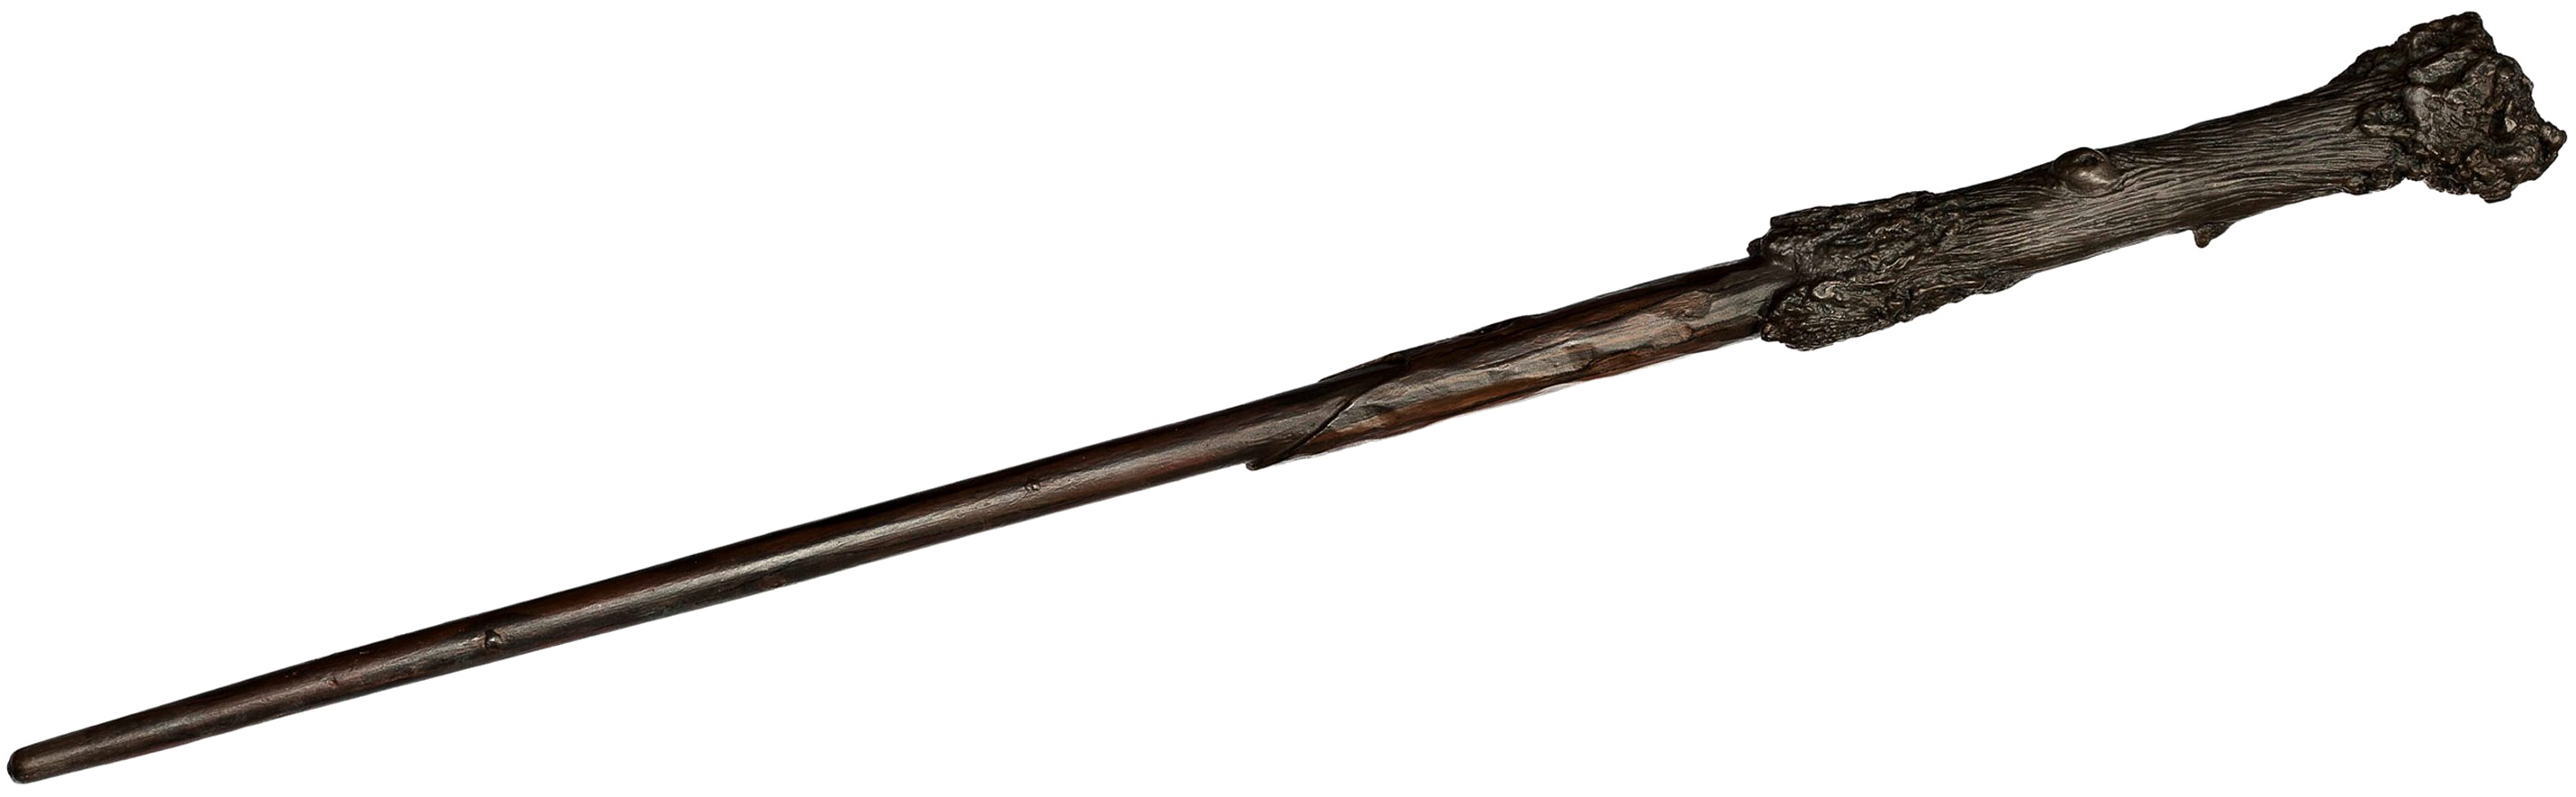 Mystical Wooden Wand PNG